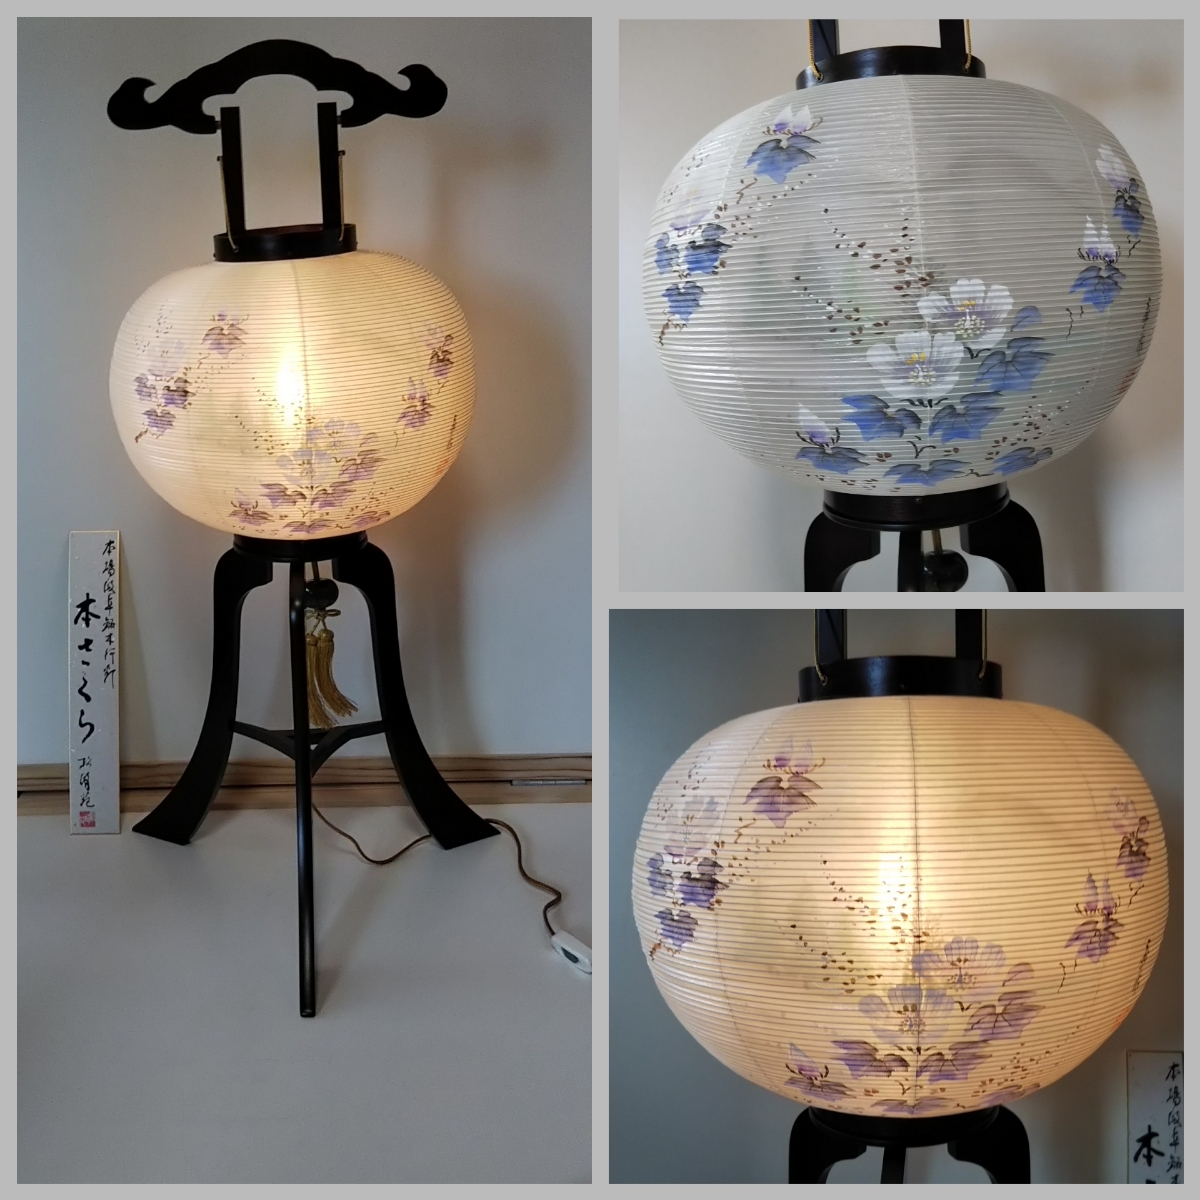  use . genuine Gifu large inside lamp with a paper shade book@ Sakura tray lantern height approximately 84. two -ply silk canvas . new tray law necessary O-Bon Buddhist altar fittings paper-covered lamp stand 